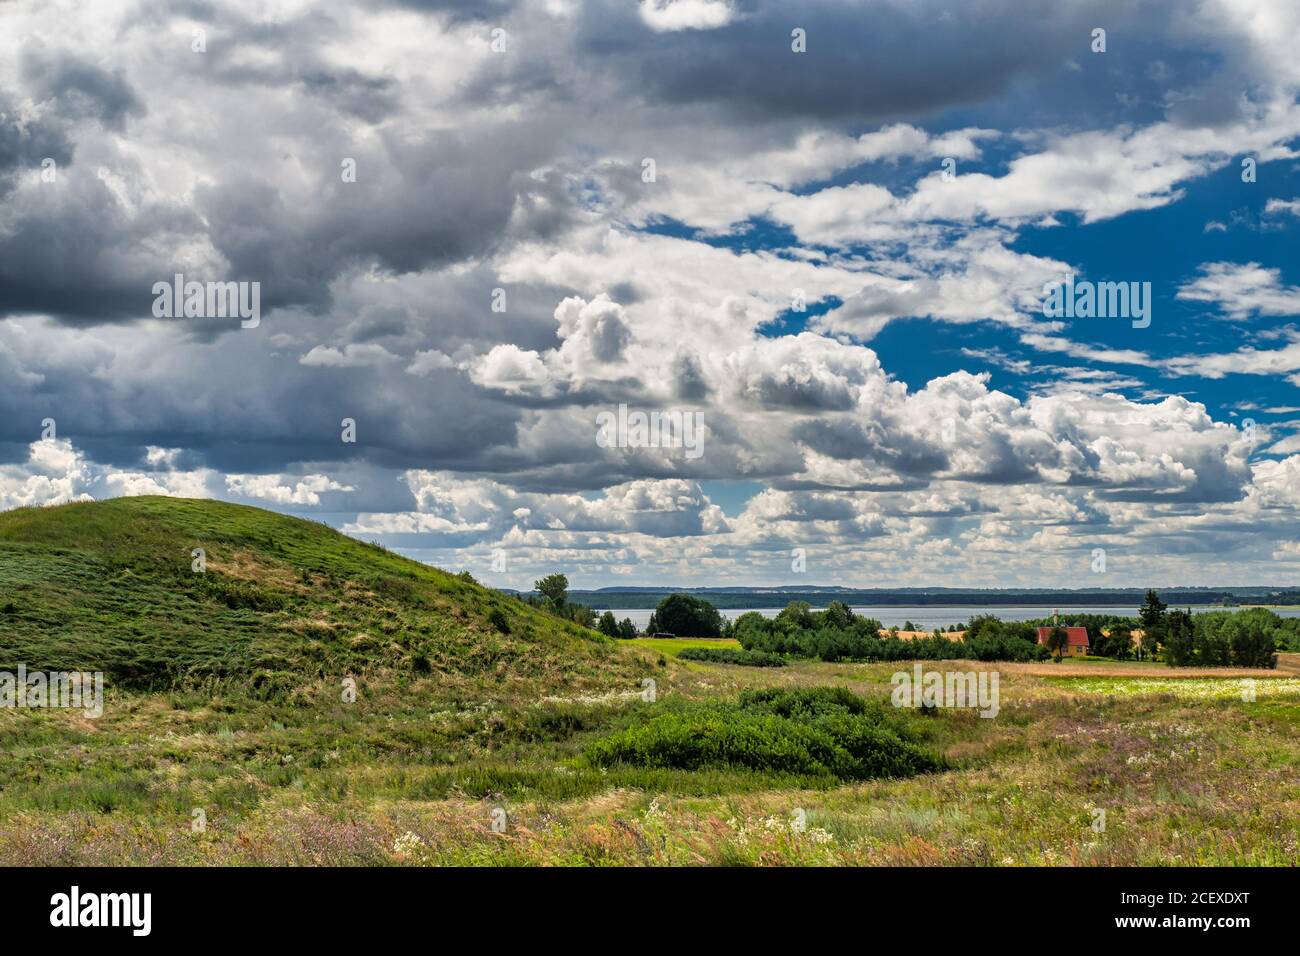 Papeciai Mound Opens a Magnificent View of The Great Lakes of Dzukija Region Stock Photo